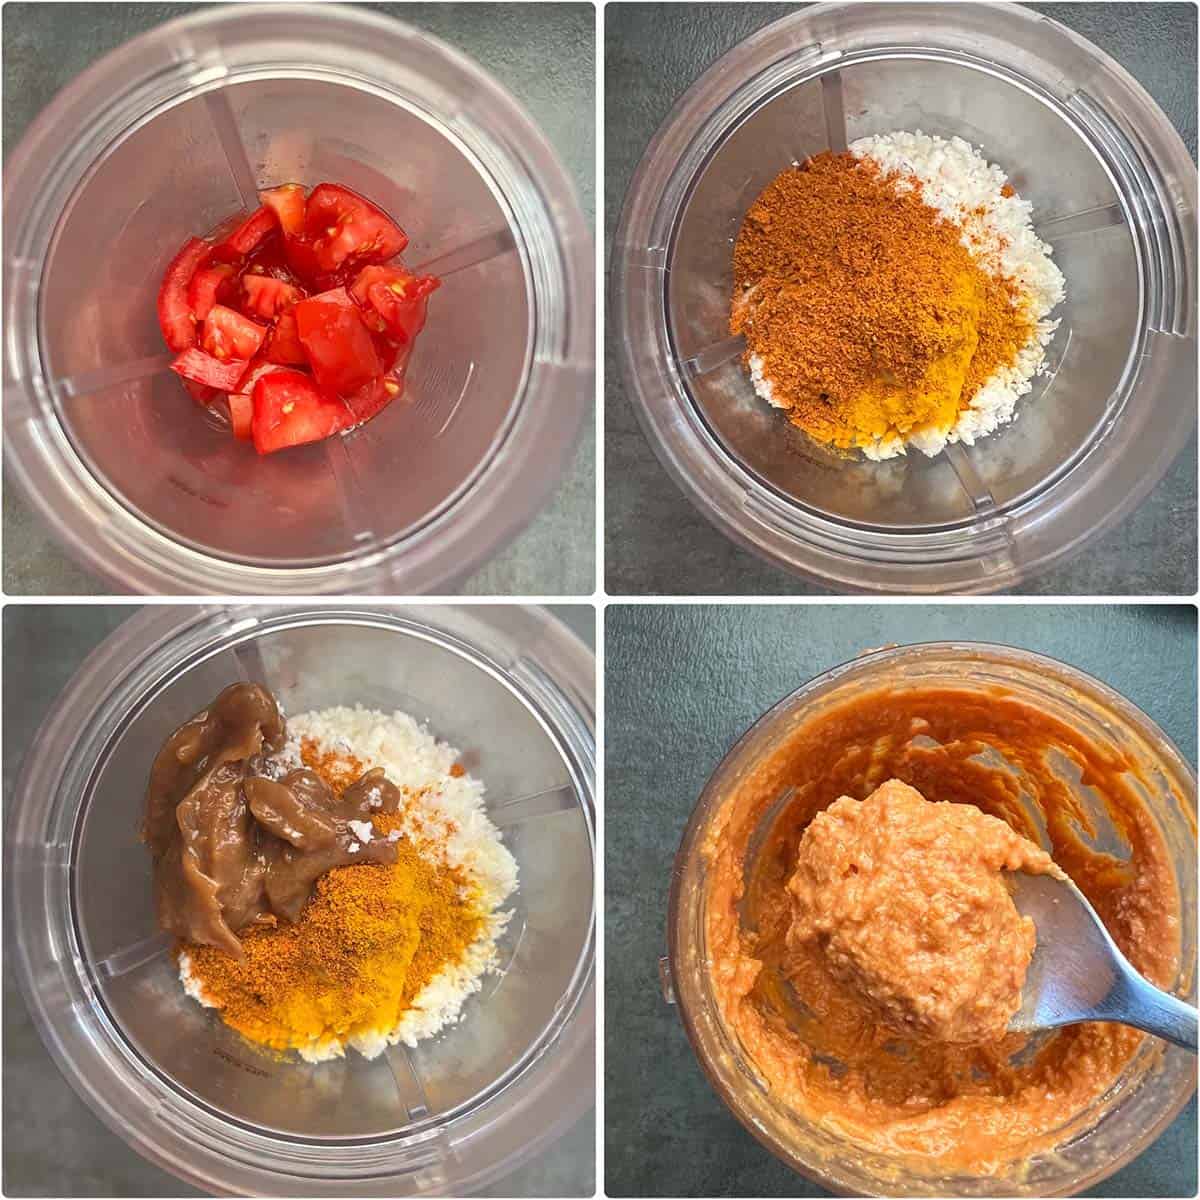 4 panel photo showing the making of tomato paste in a blender.